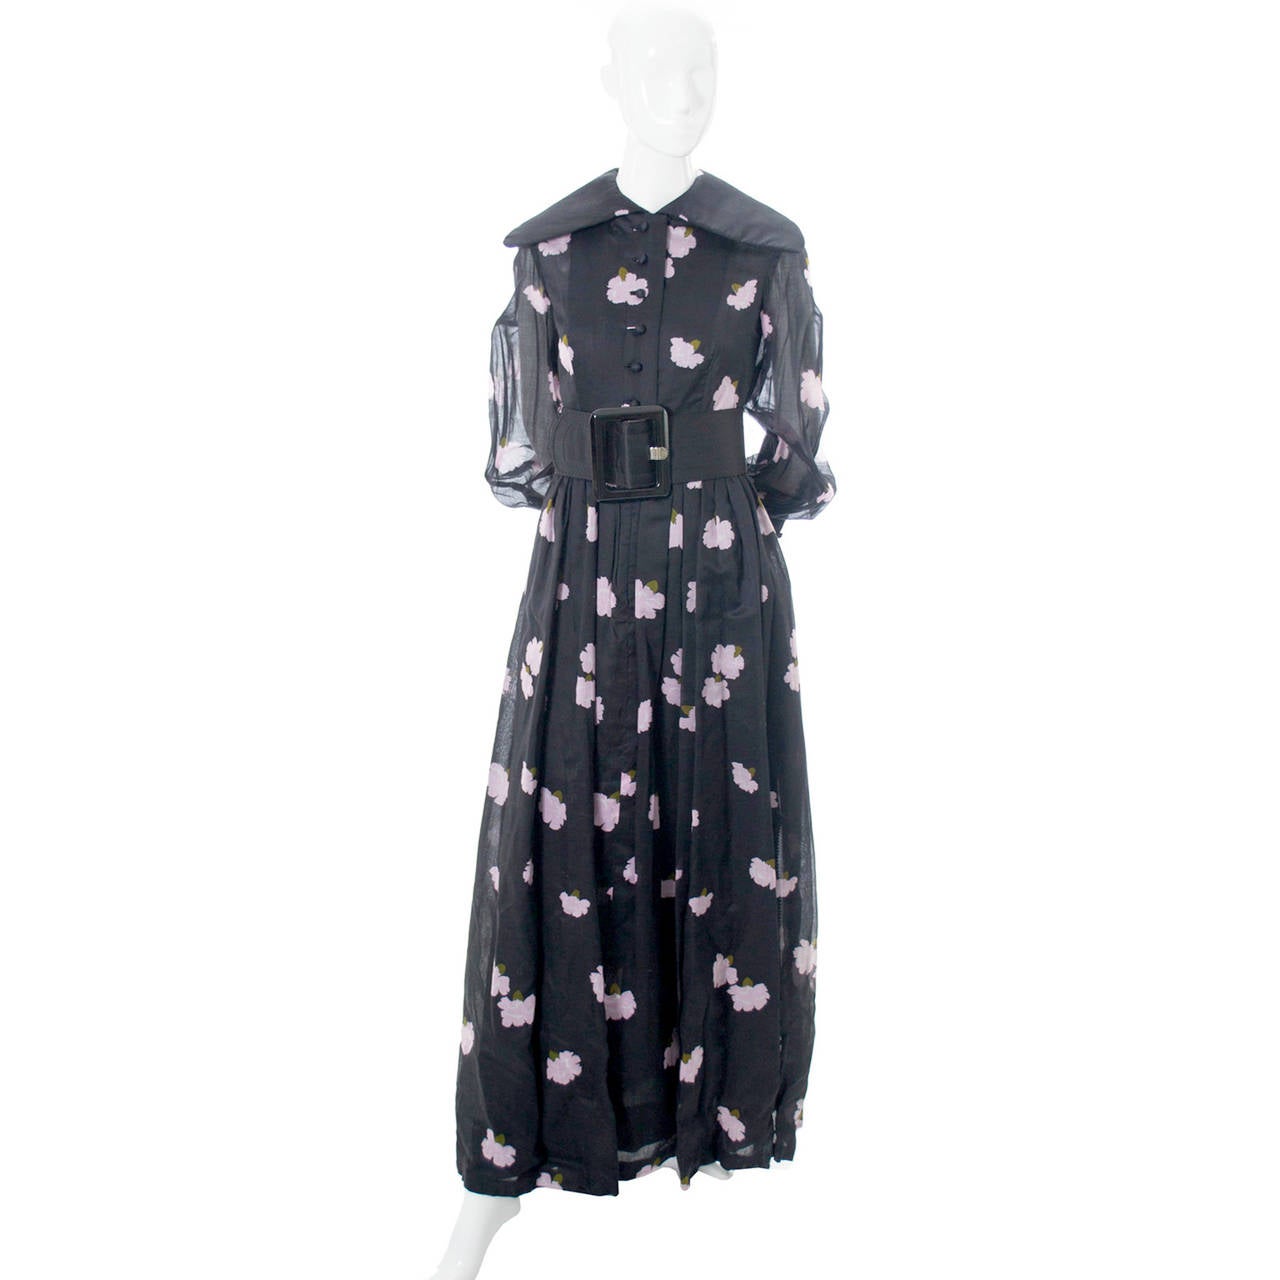 This rare vintage black and pink floral Geoffrey Beene dress is from one of our more prominent estates and it is truly spectacular. This incredible vintage dress comes with its original fabulous satin covered belt that is just under 4